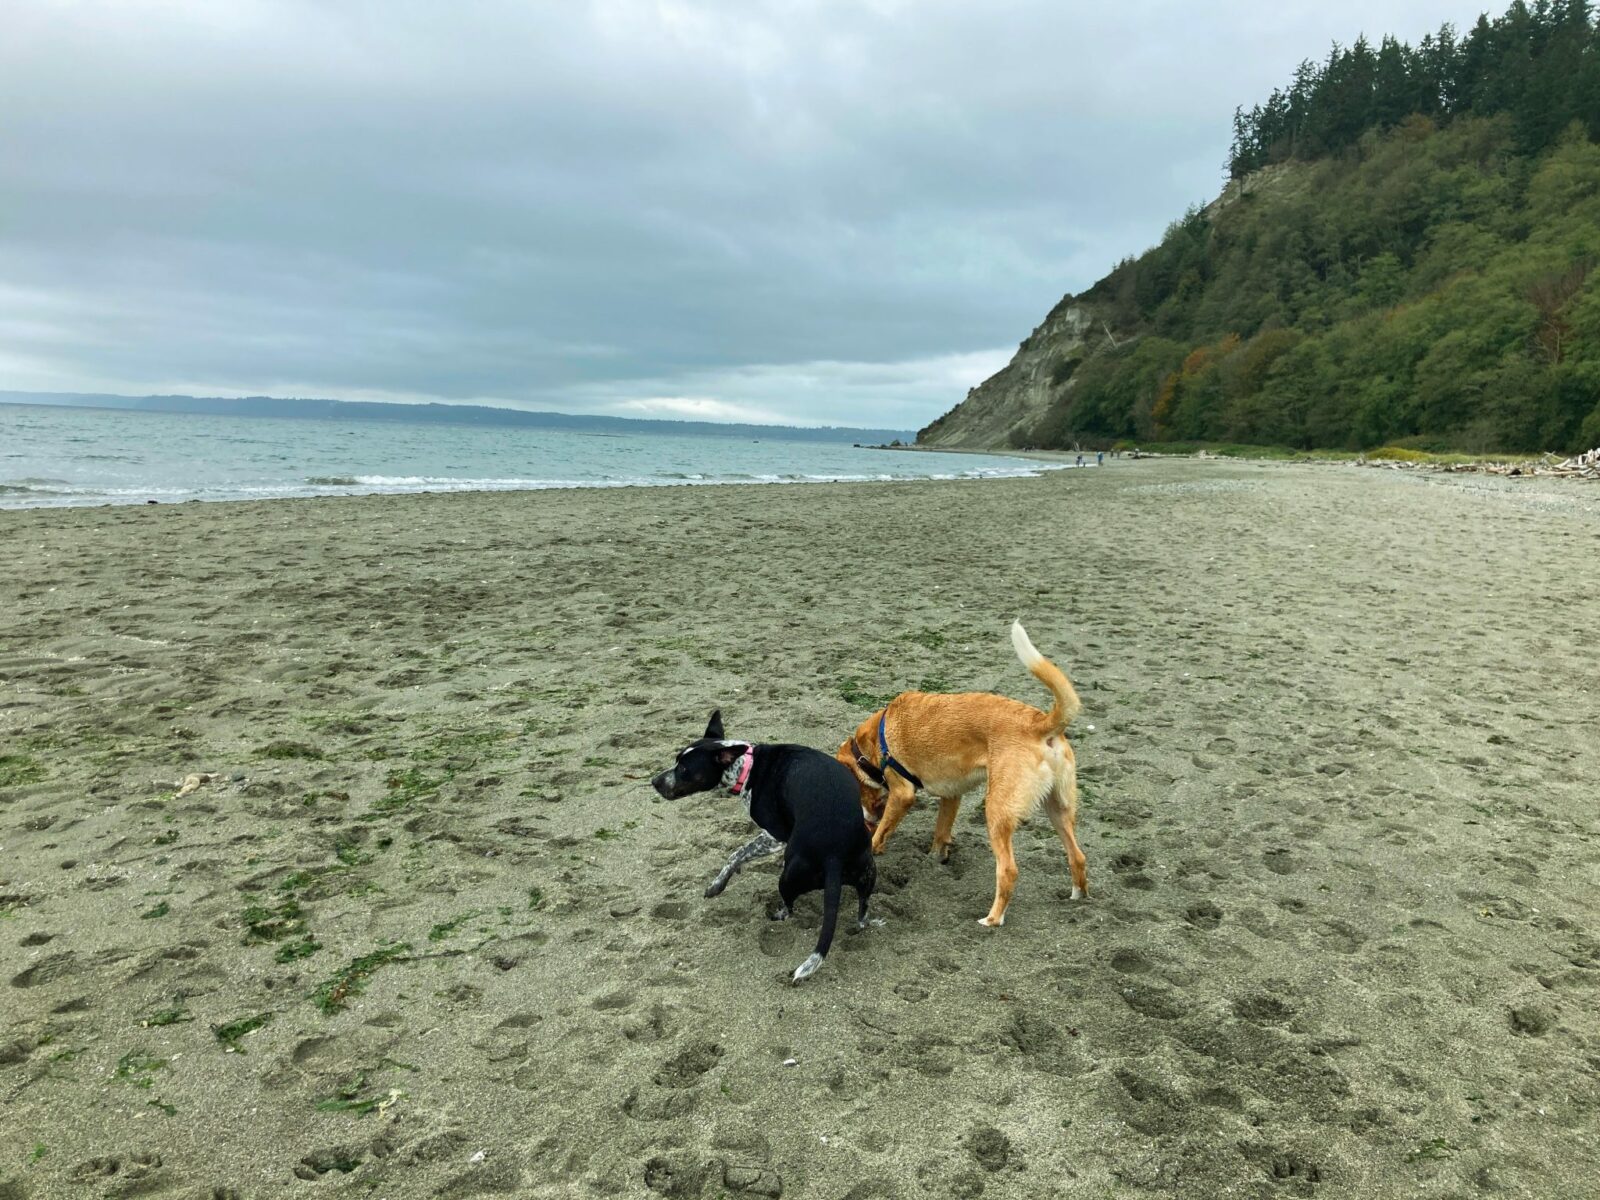 Two dogs, one black and white and one tan and white play on a gray sand beach. There is a forested hillside behind them and the water stretches away from the beach on an overcast day